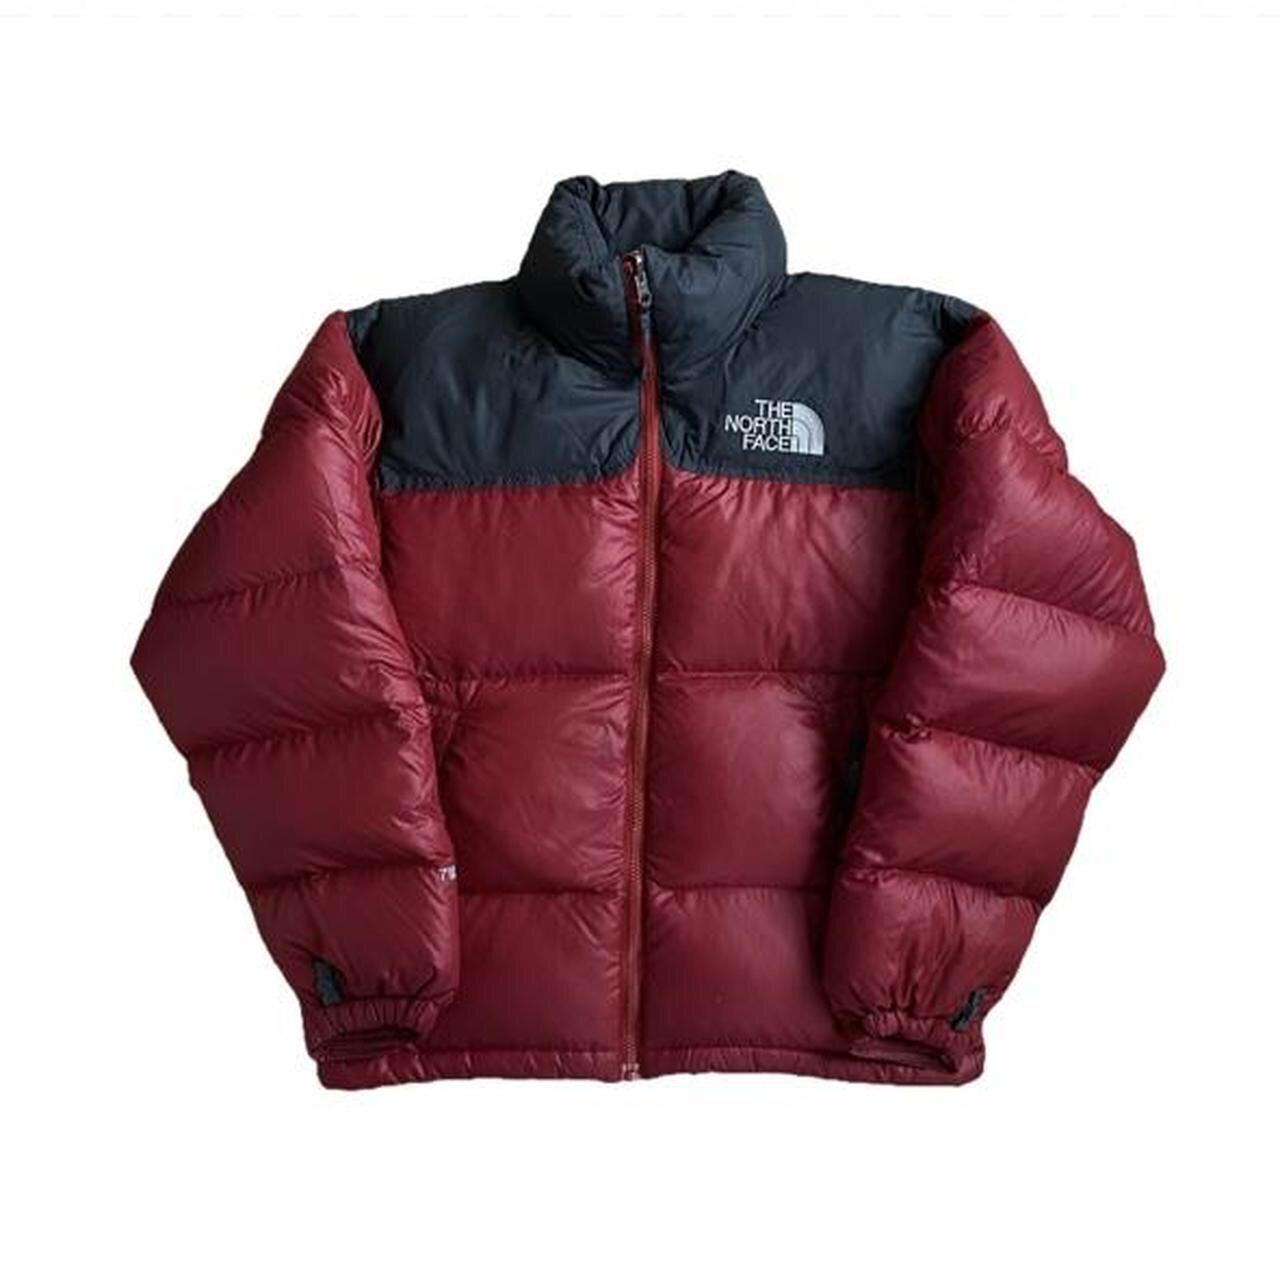 The North Face Men's Red and Grey Jacket | Depop